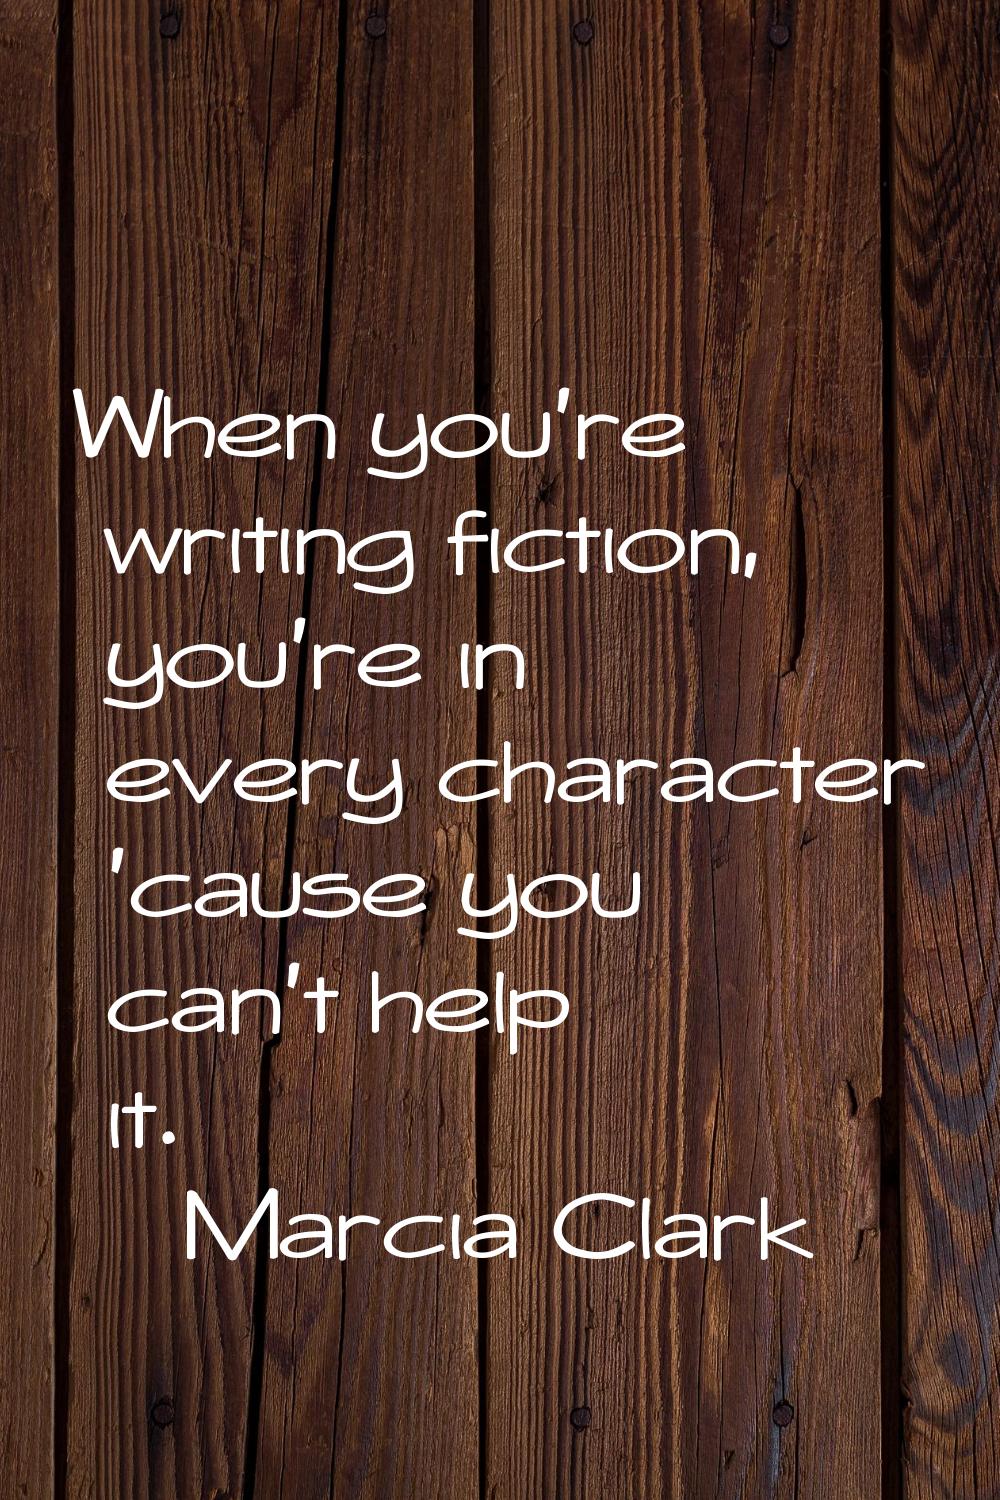 When you're writing fiction, you're in every character 'cause you can't help it.